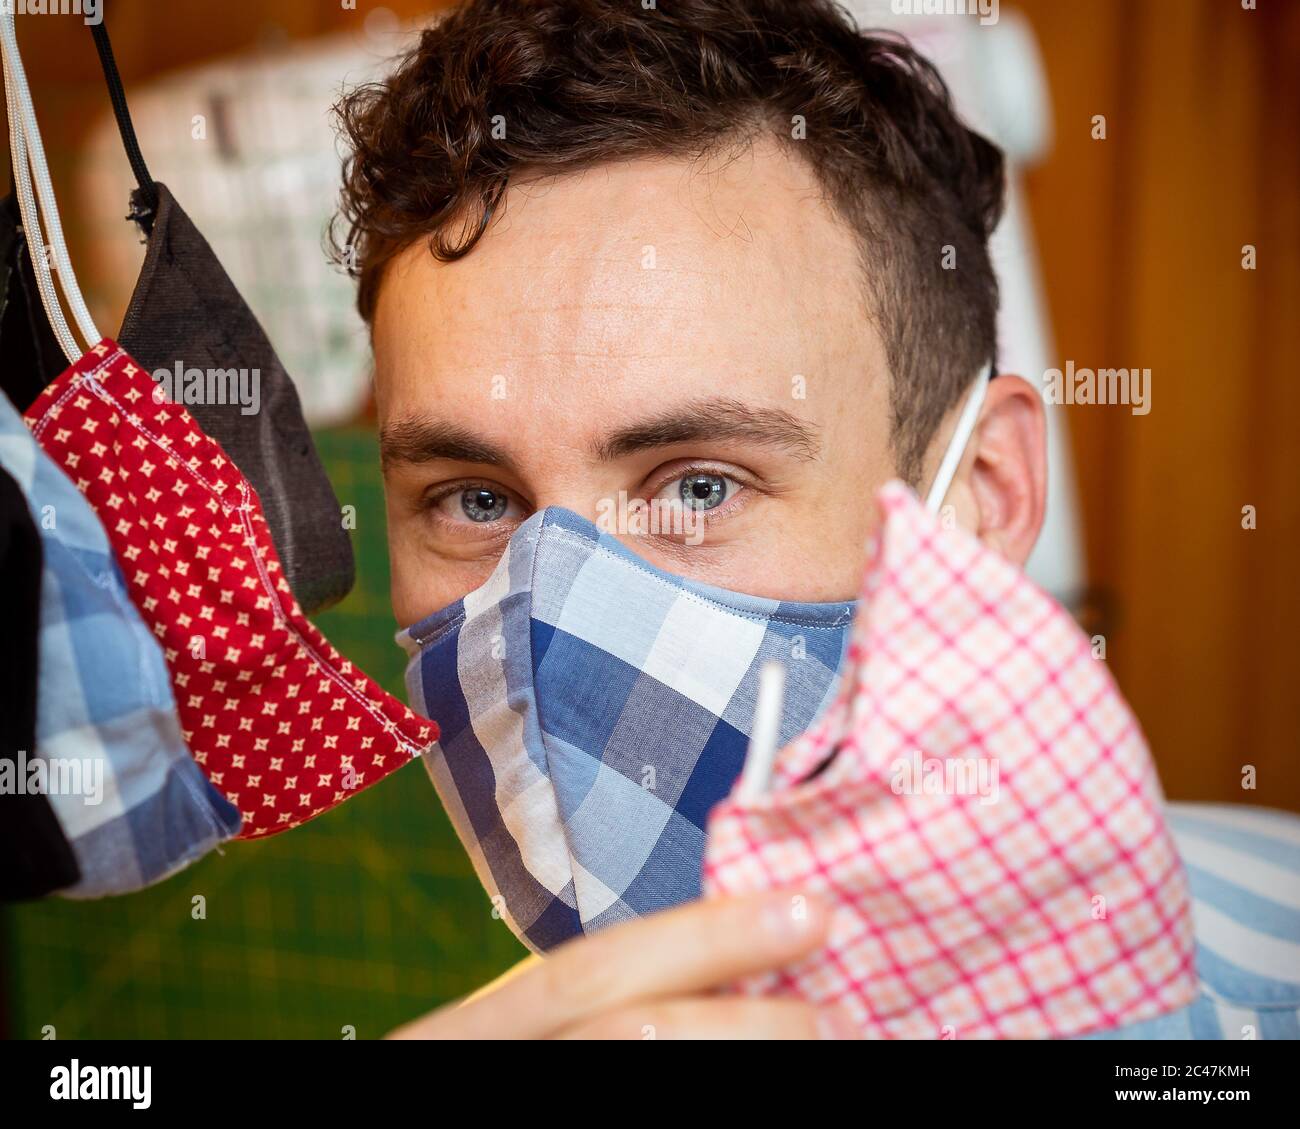 Young handsome male mask maker displaying his deluxe handmade masks blue eyes dark hair good bone structure pink plaid red stars black big blue checks Stock Photo